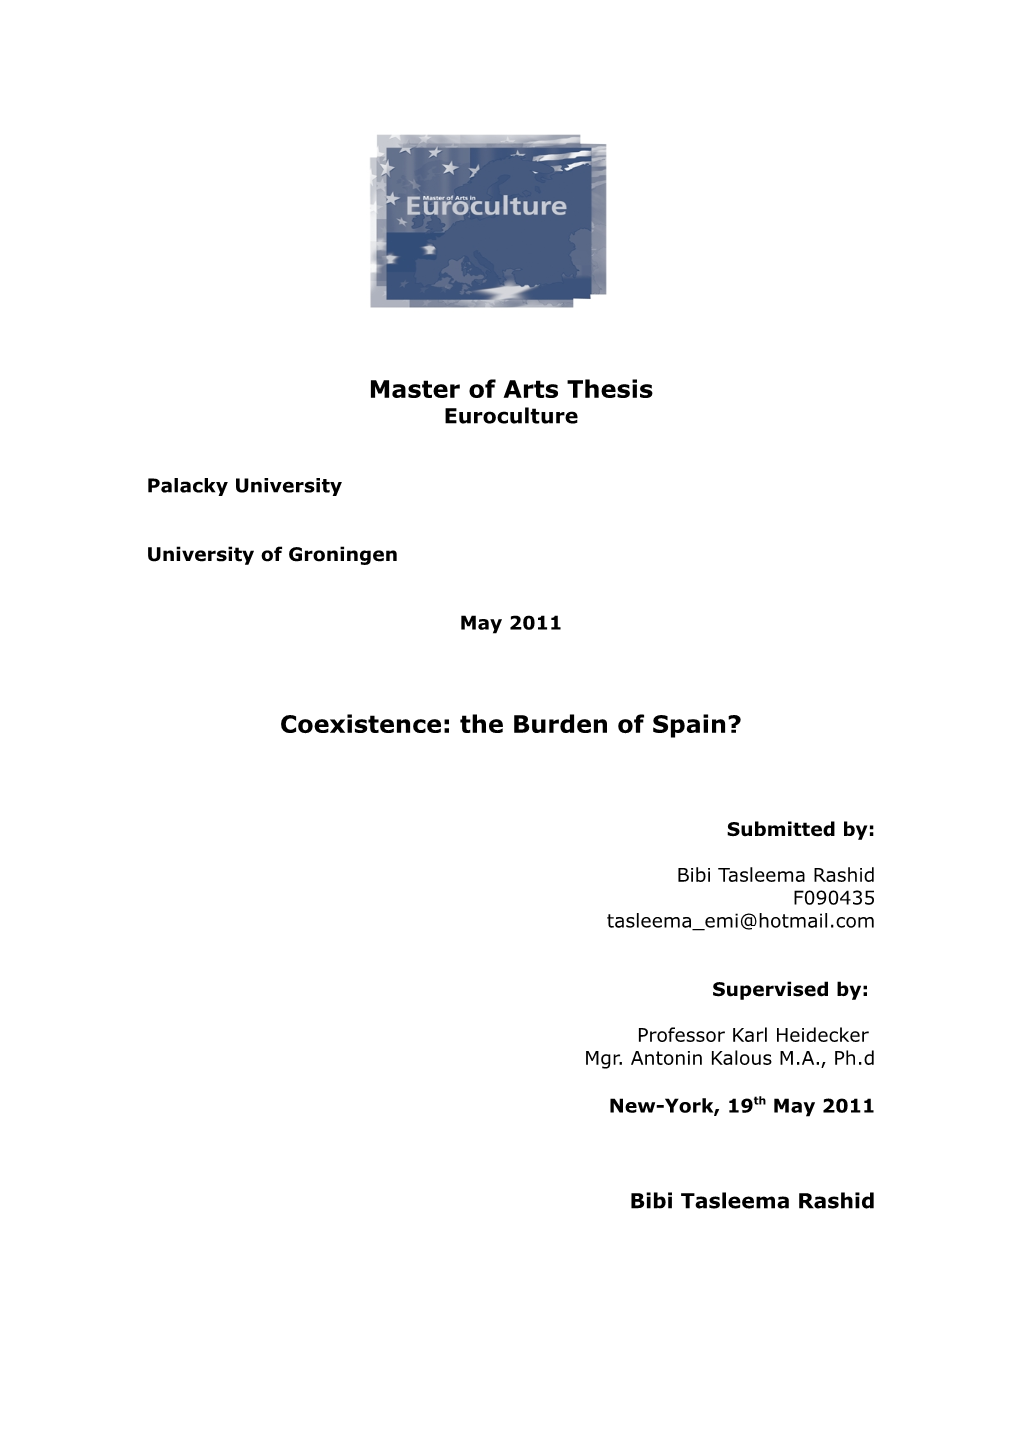 Master of Arts Thesis Coexistence: the Burden of Spain?